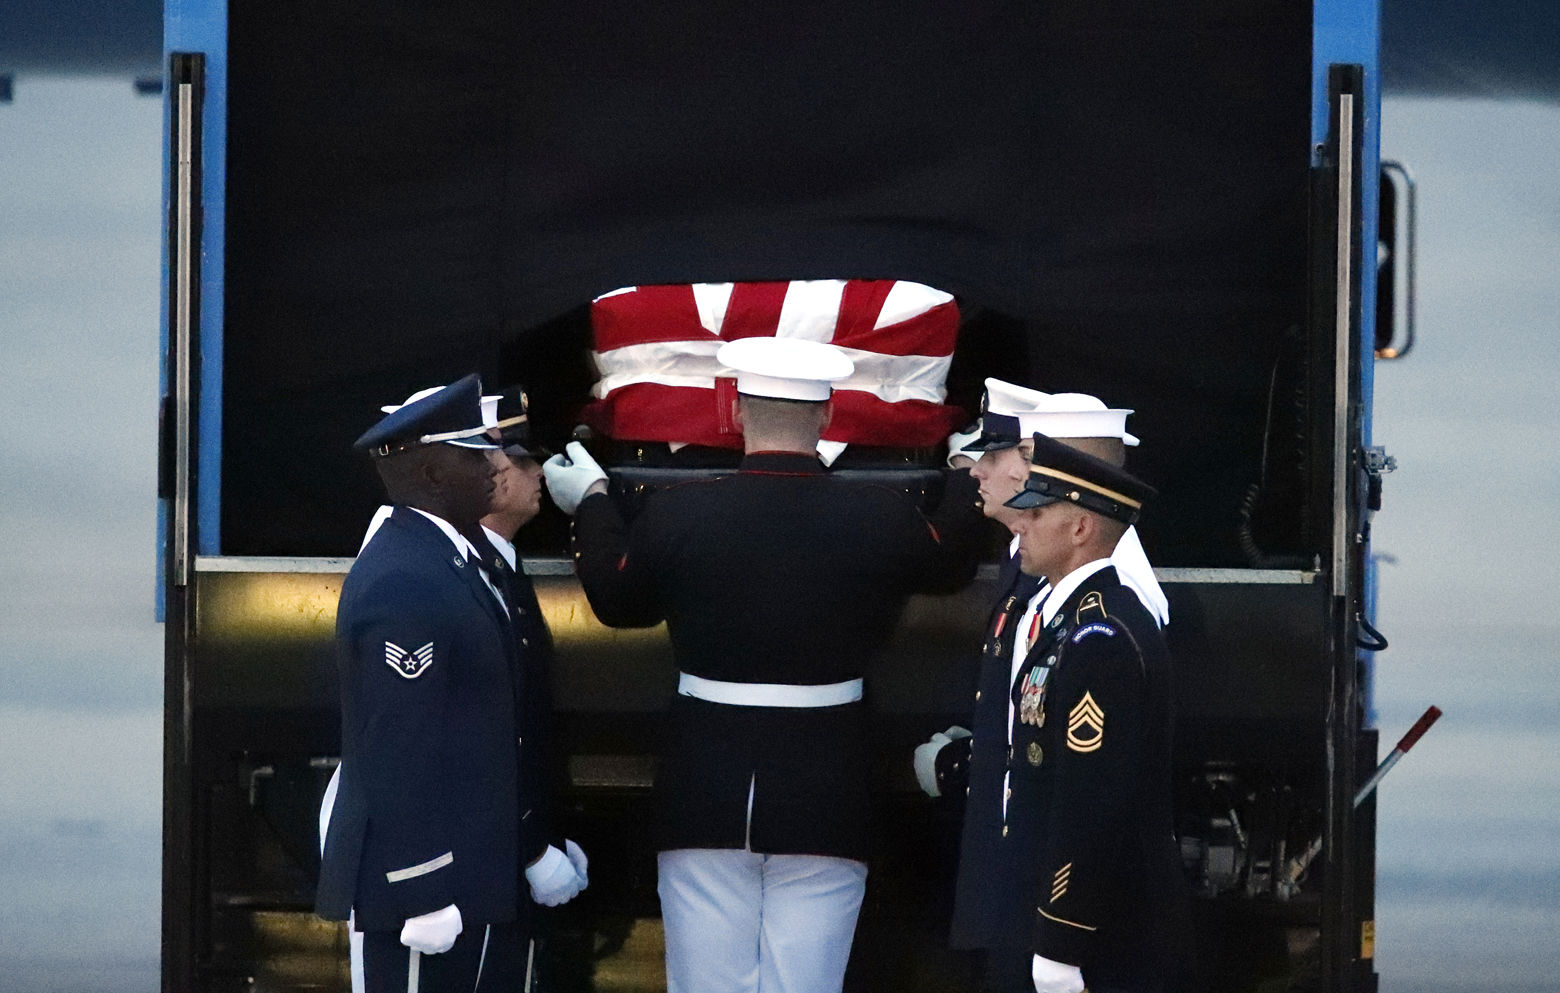 The flag-draped casket of Sen. John McCain, R-Ariz., is removed to be carried by an Armed Forces body bearer team to a hearse, Thursday, Aug. 30, 2018, at Andrews Air Force Base, Md. (AP Photo/Alex Brandon)